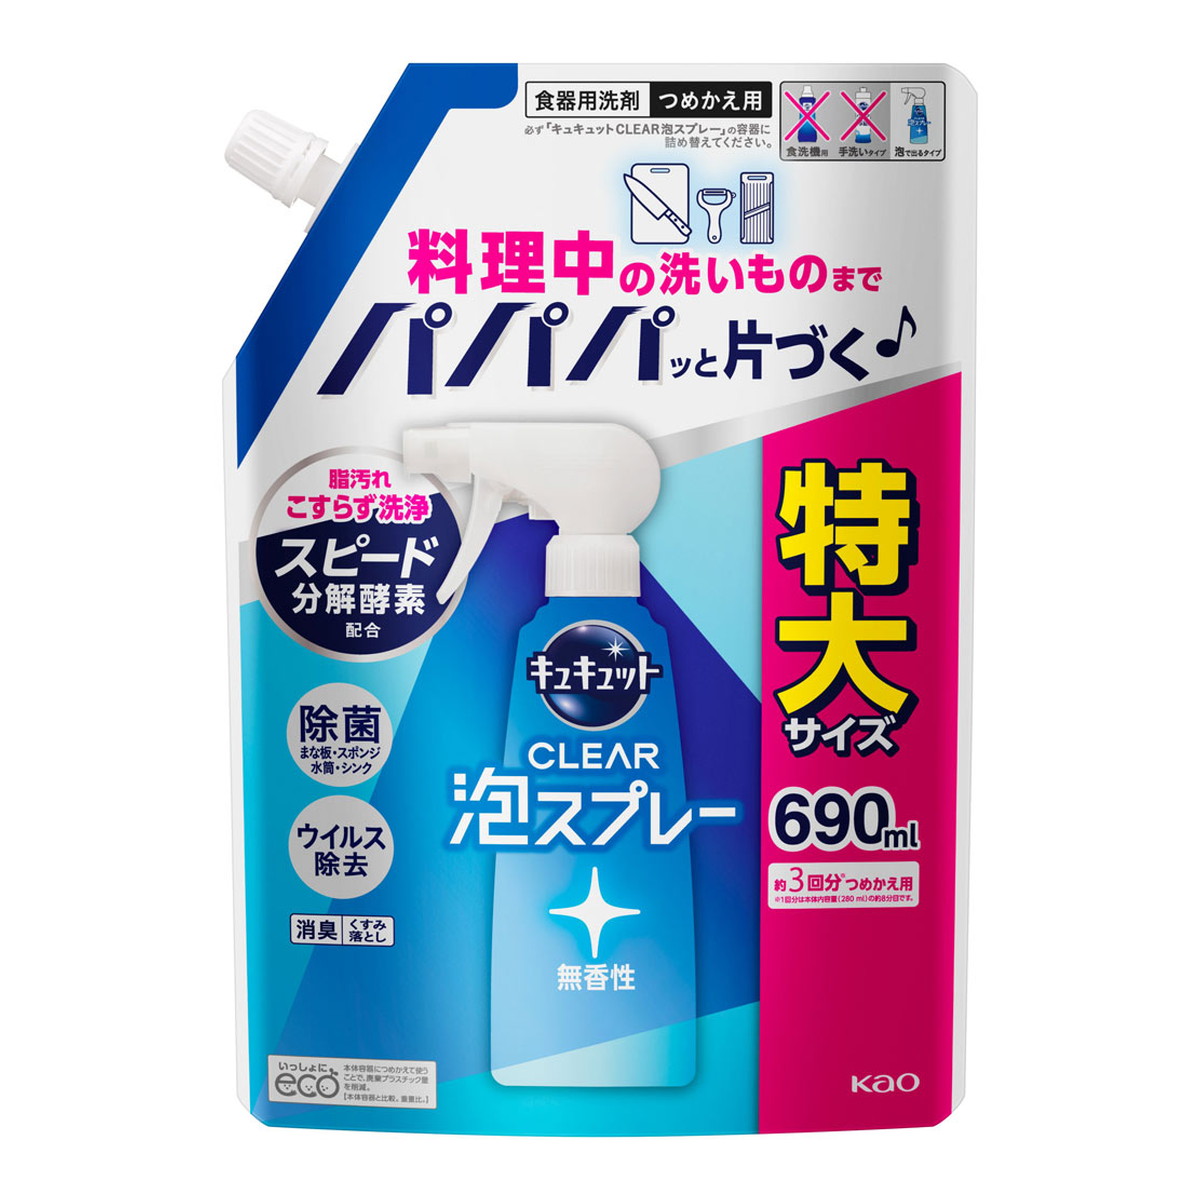 Kao キュキュット CLEAR泡スプレー 無香性 詰替用 690ml ×1 キュキュット 台所用洗剤の商品画像